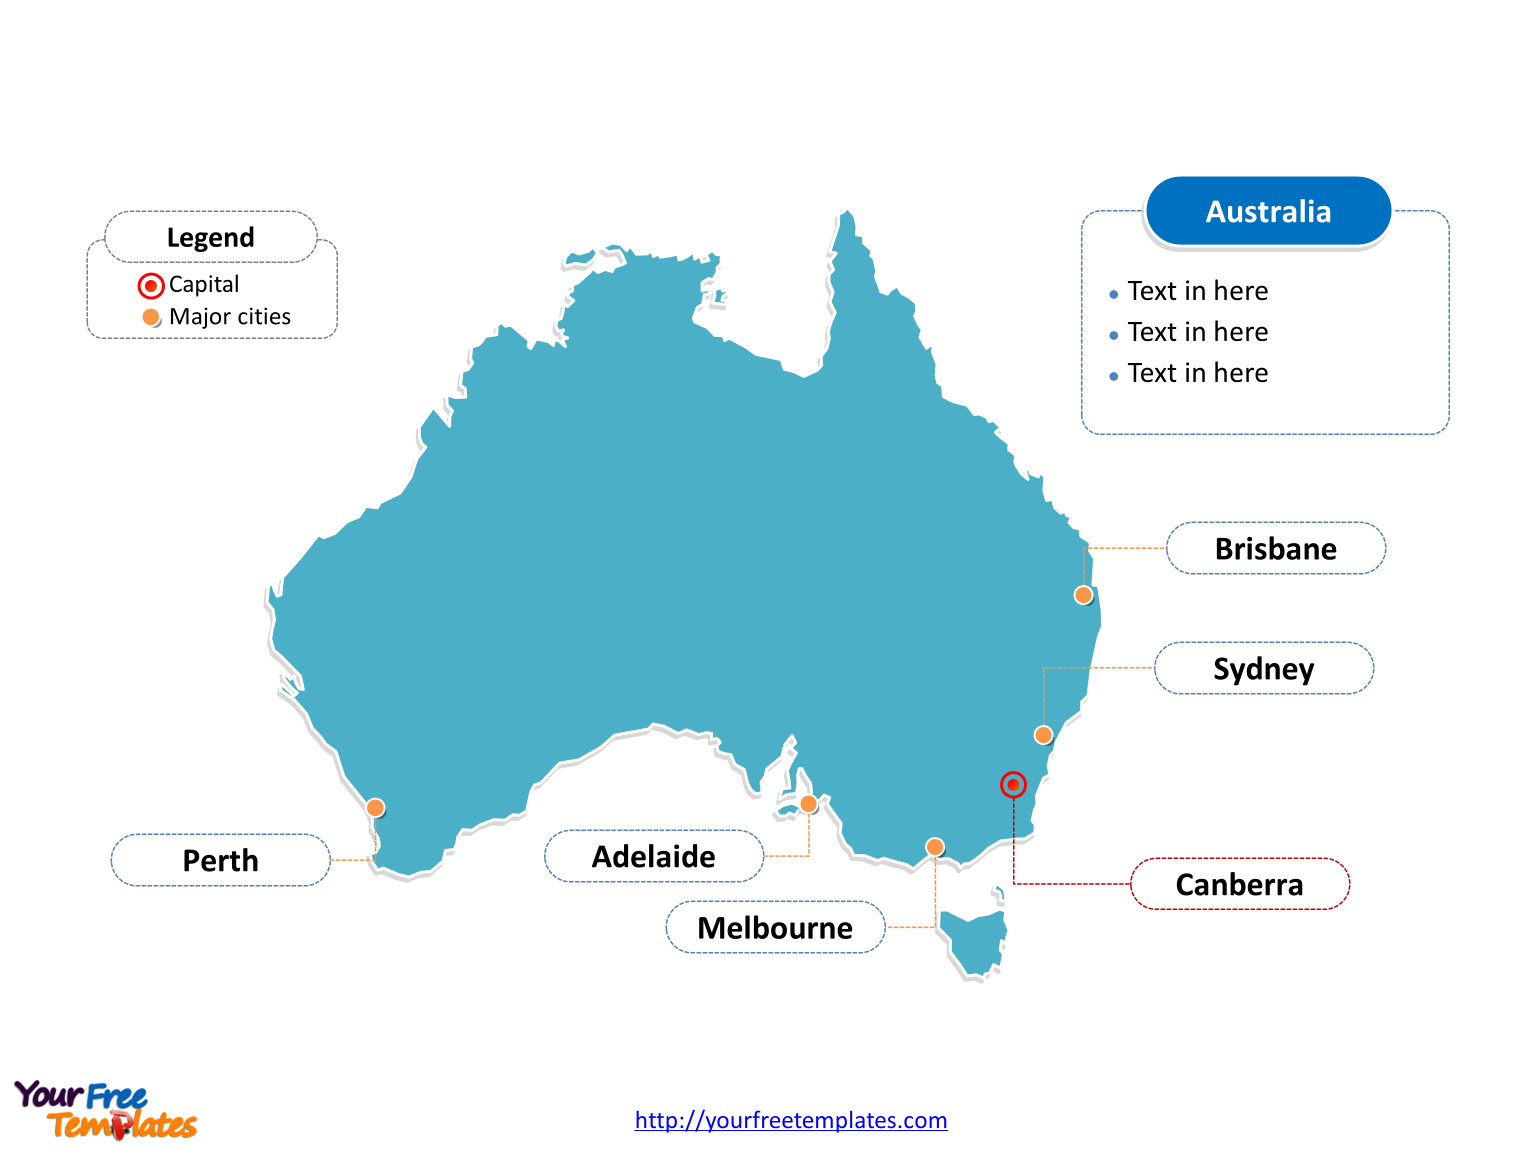 Editable Australia map labeled with cities